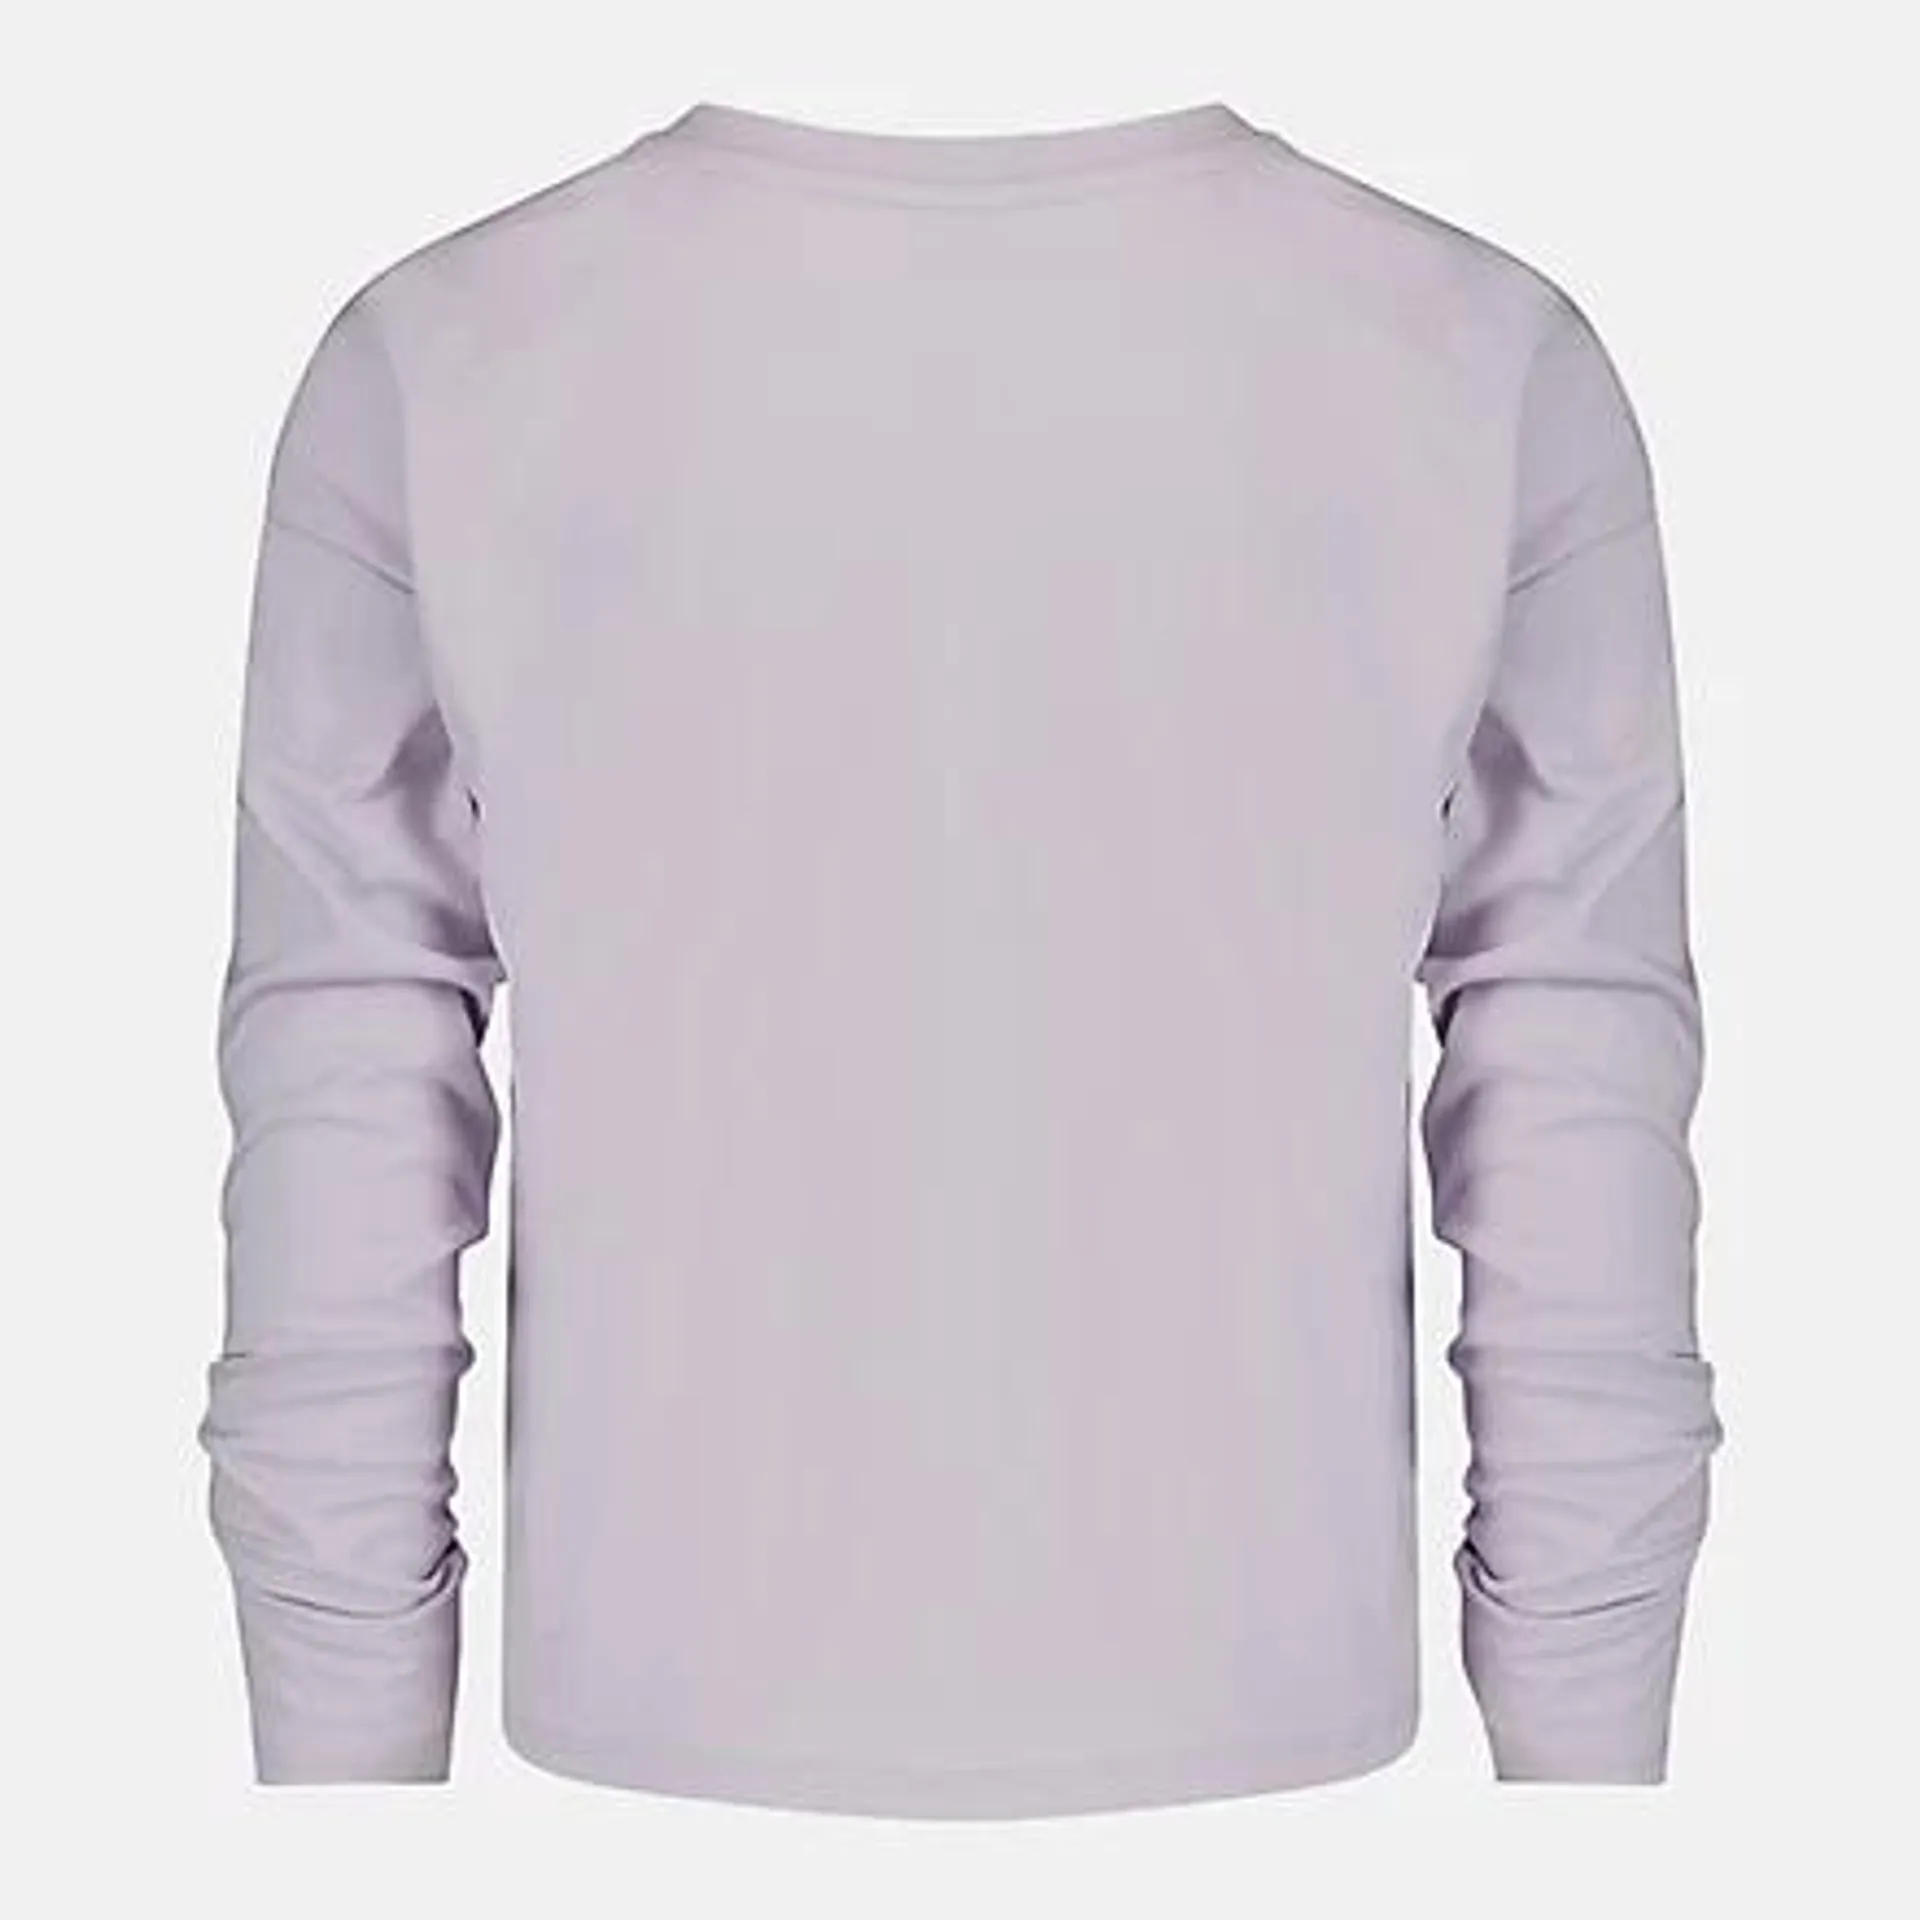 Girls Long Sleeve Knotted Tee